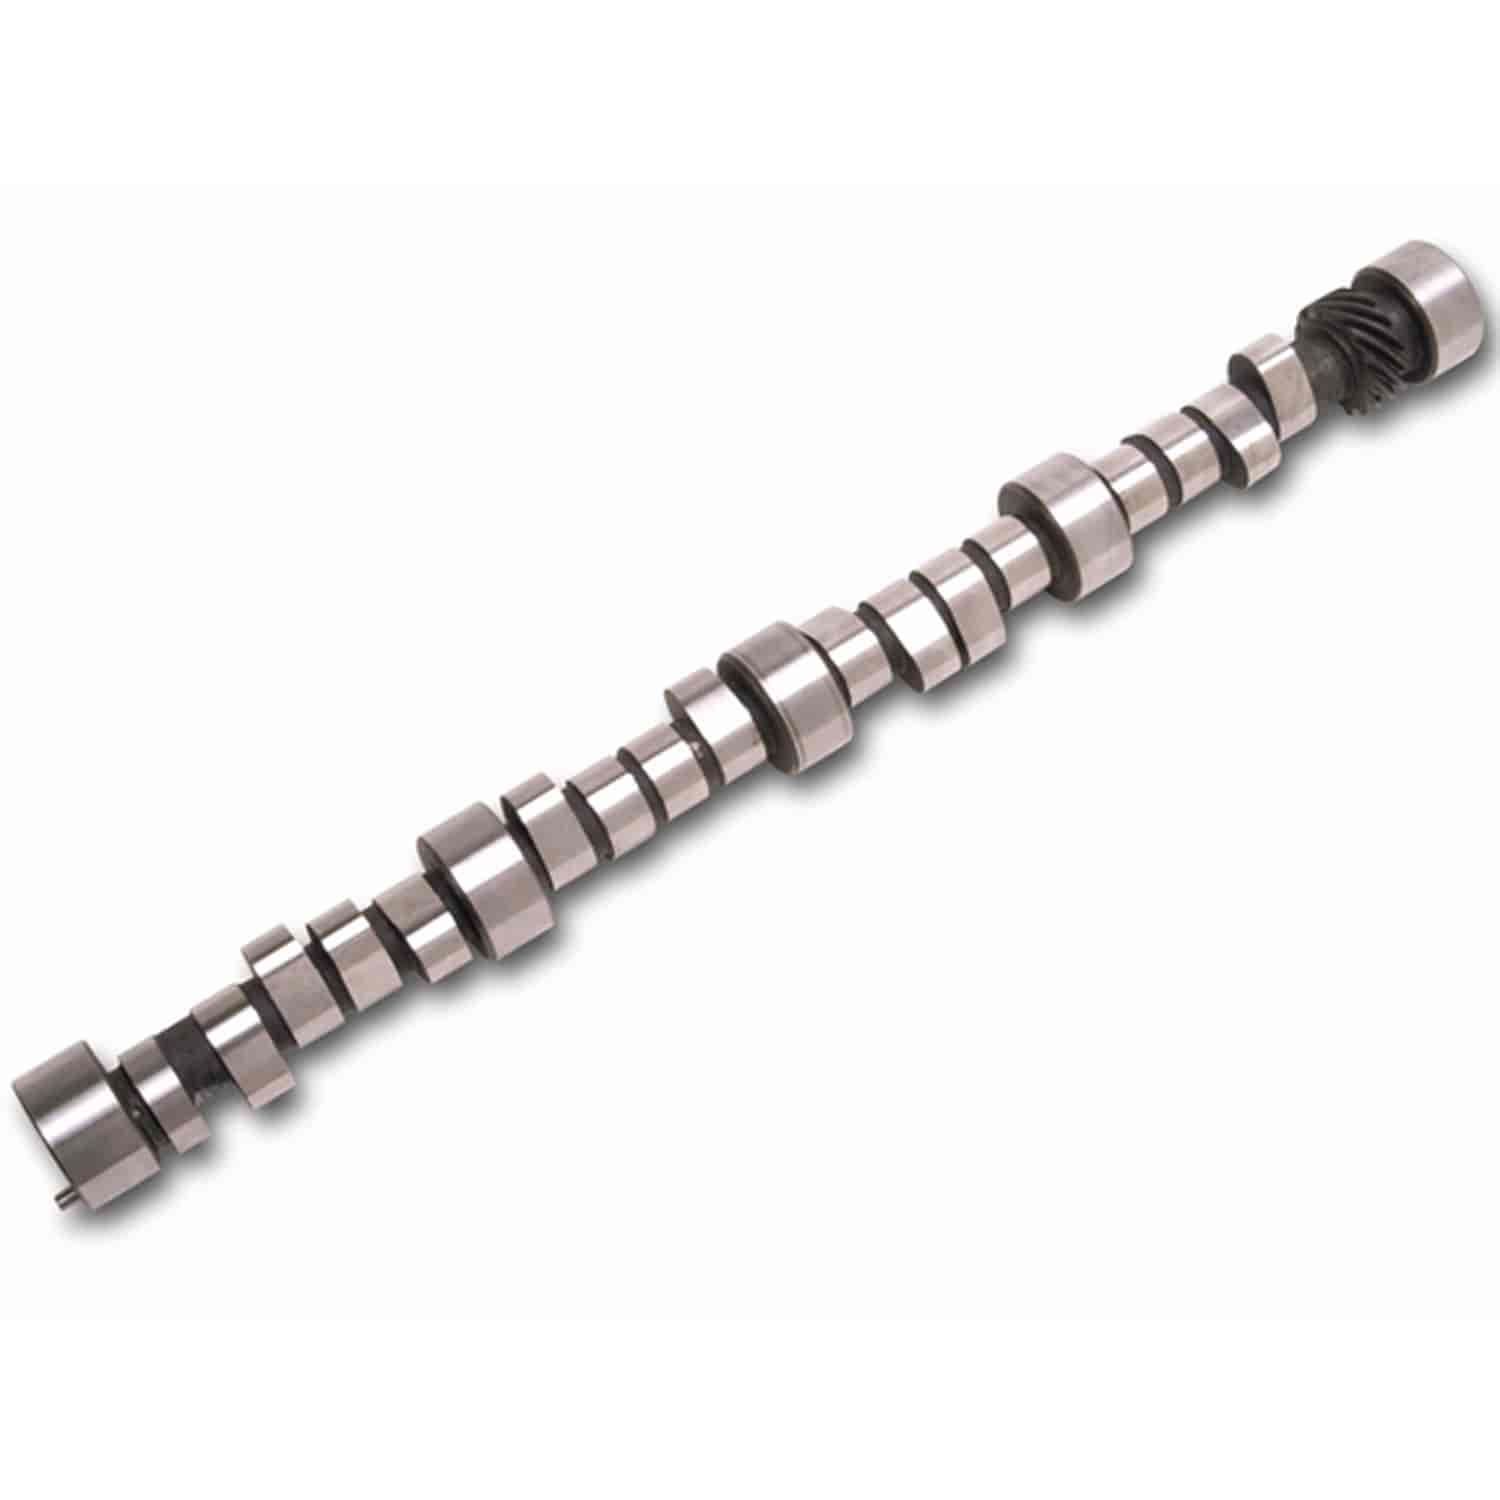 Rollin' Thunder Hydraulic Roller Camshaft for 1955-1986 Small